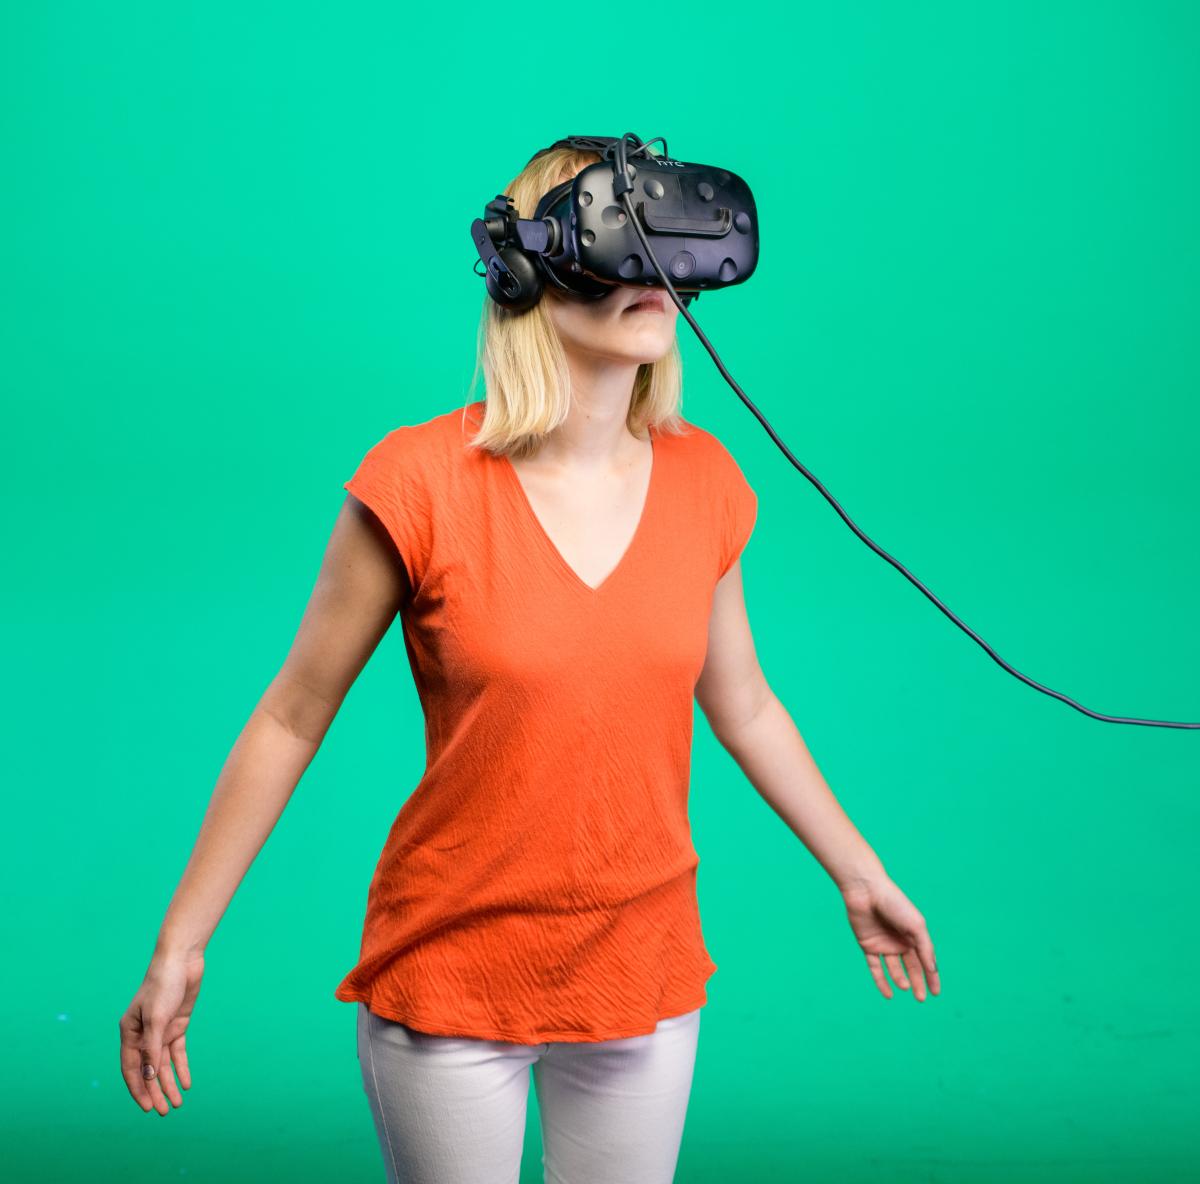 A woman wearing VR glasses.